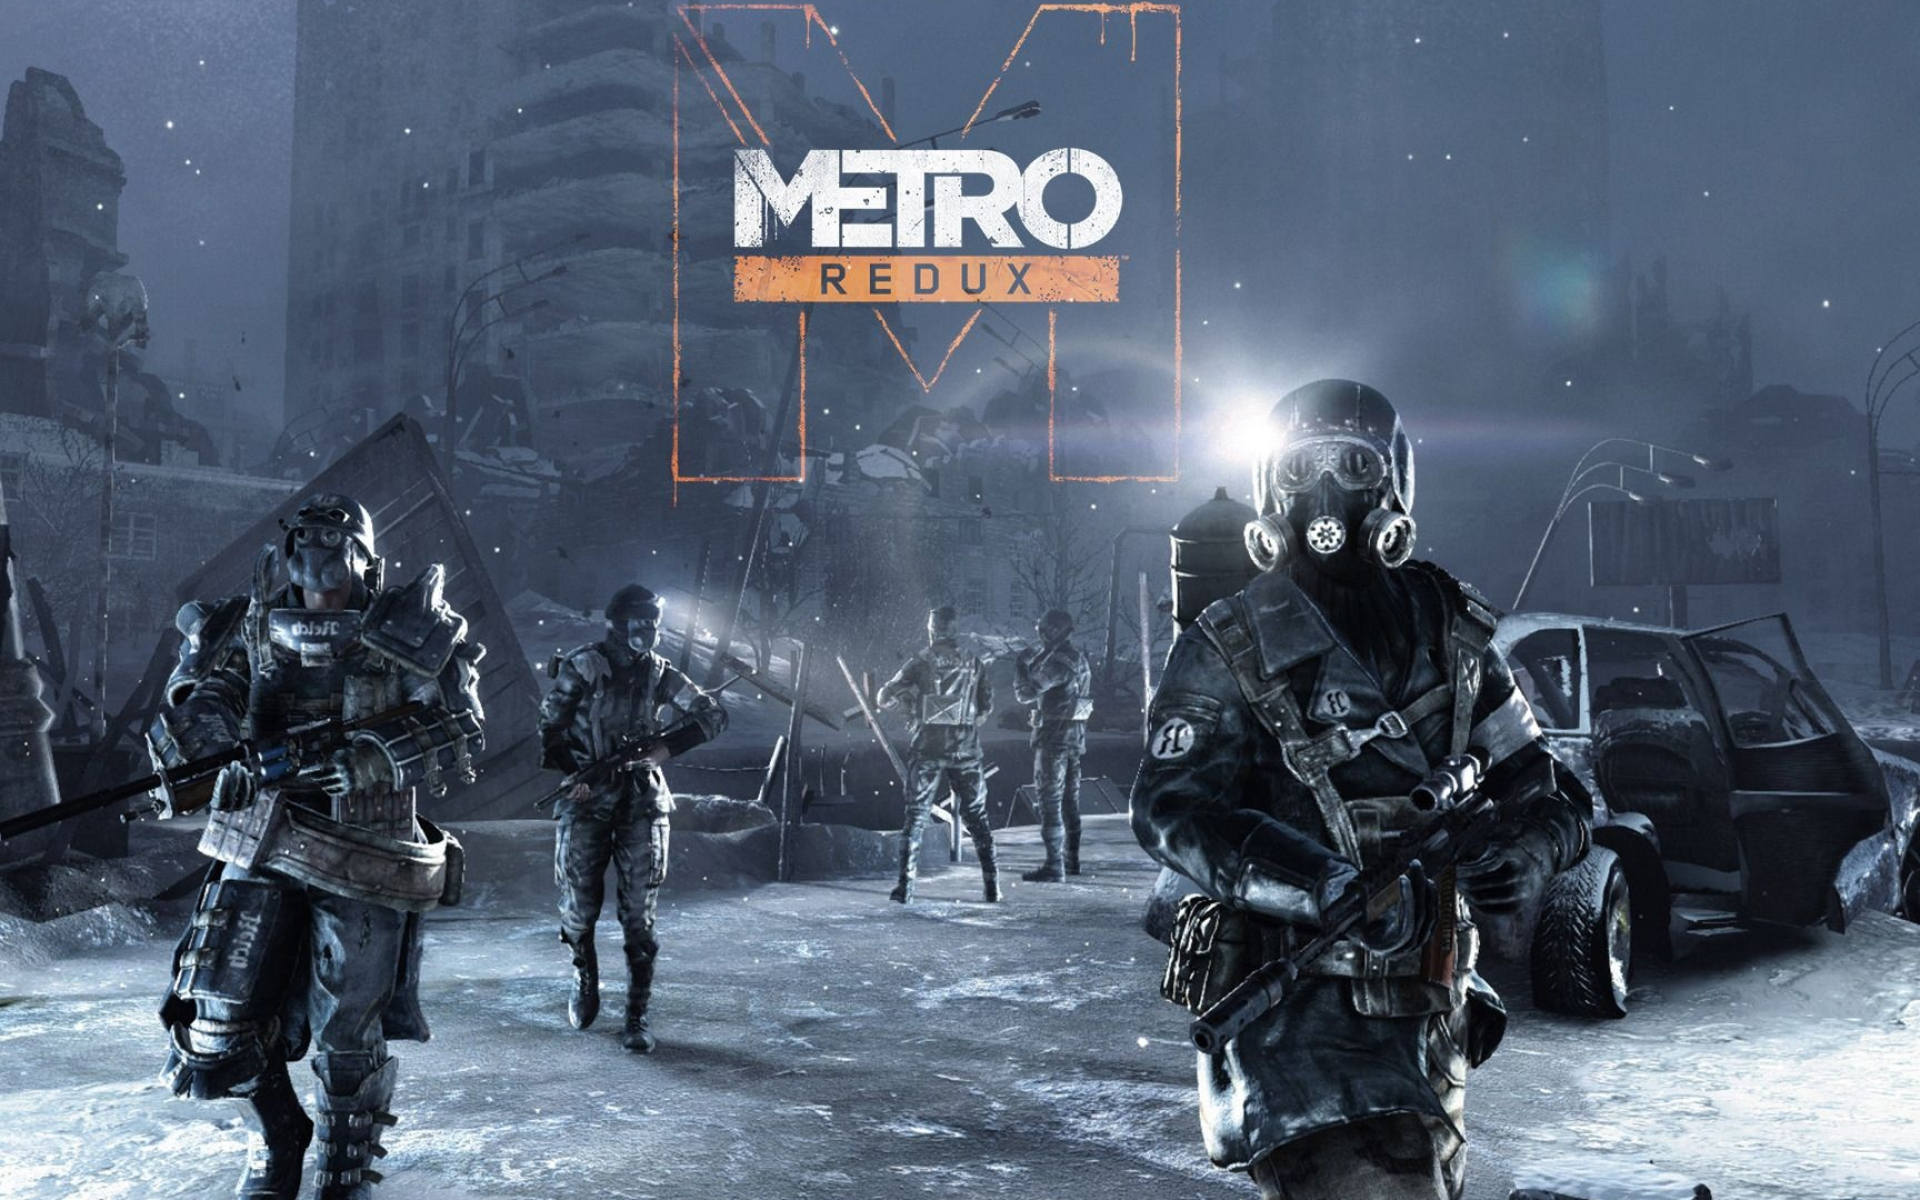 Metro: 2033 Redux, Desolate subway stations, Mysterious anomalies, Action-packed adventure, 1920x1200 HD Desktop